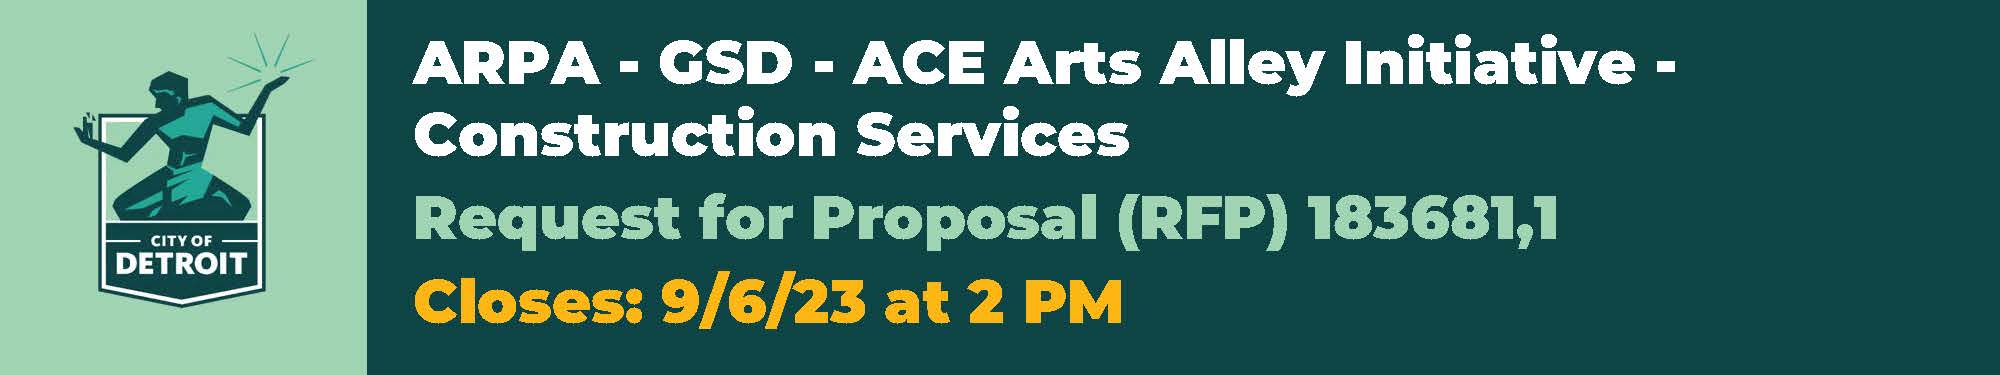 Take Part: ARPA - GSD - ACE Arts Alley Initiative - Construction Services